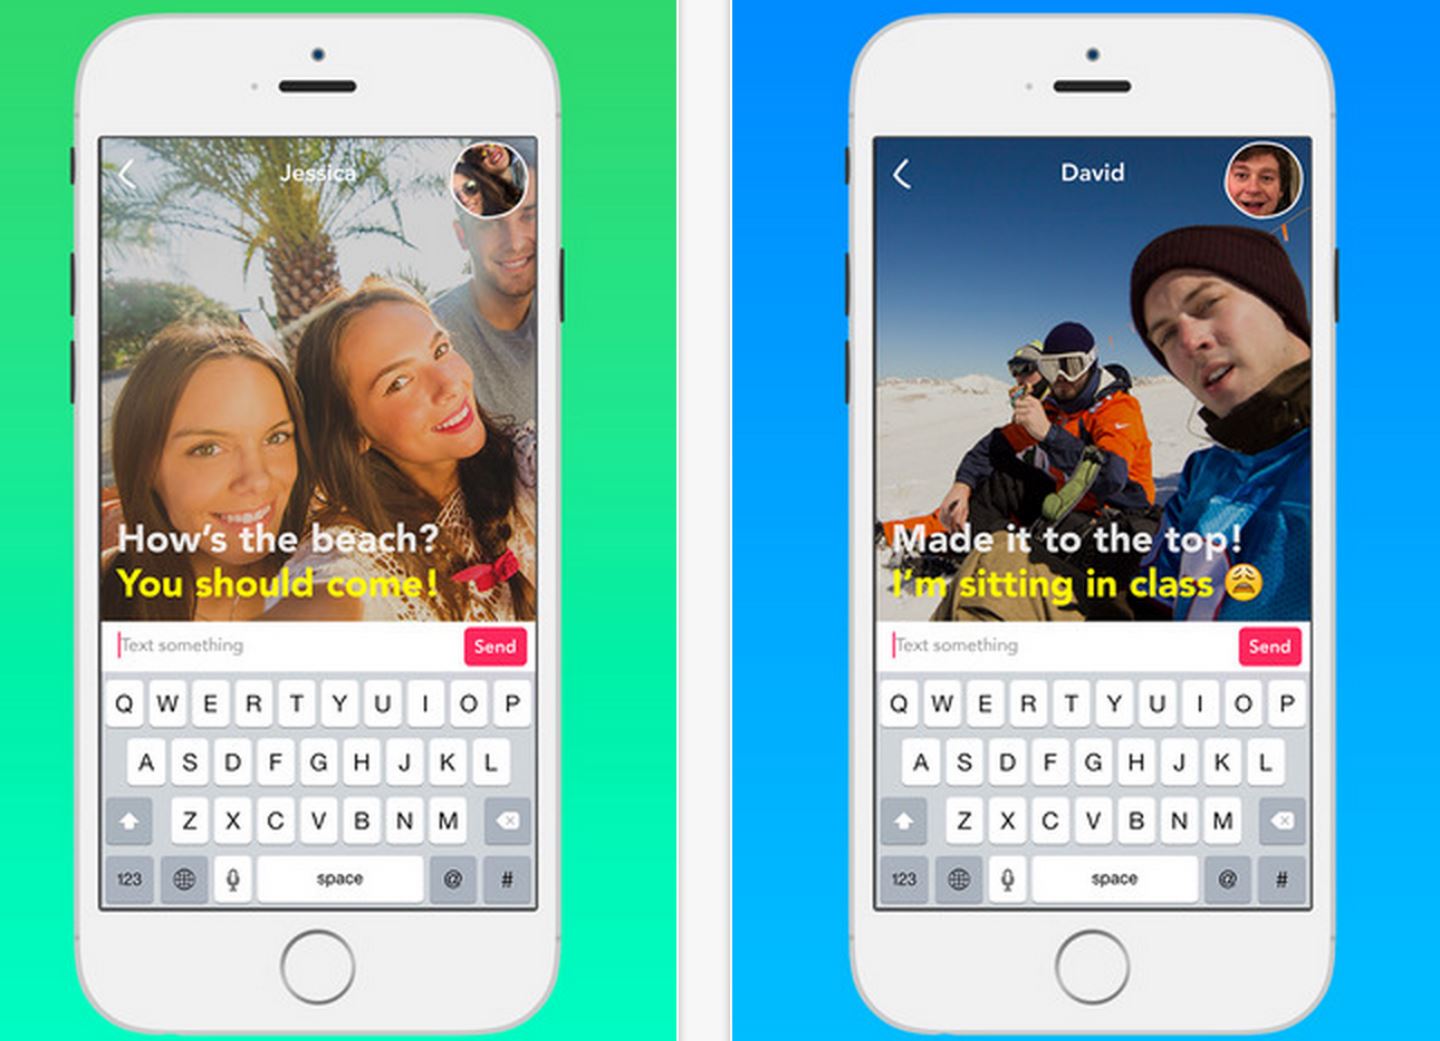 Yahoo Quietly Launches Live Video Chat App for iOS